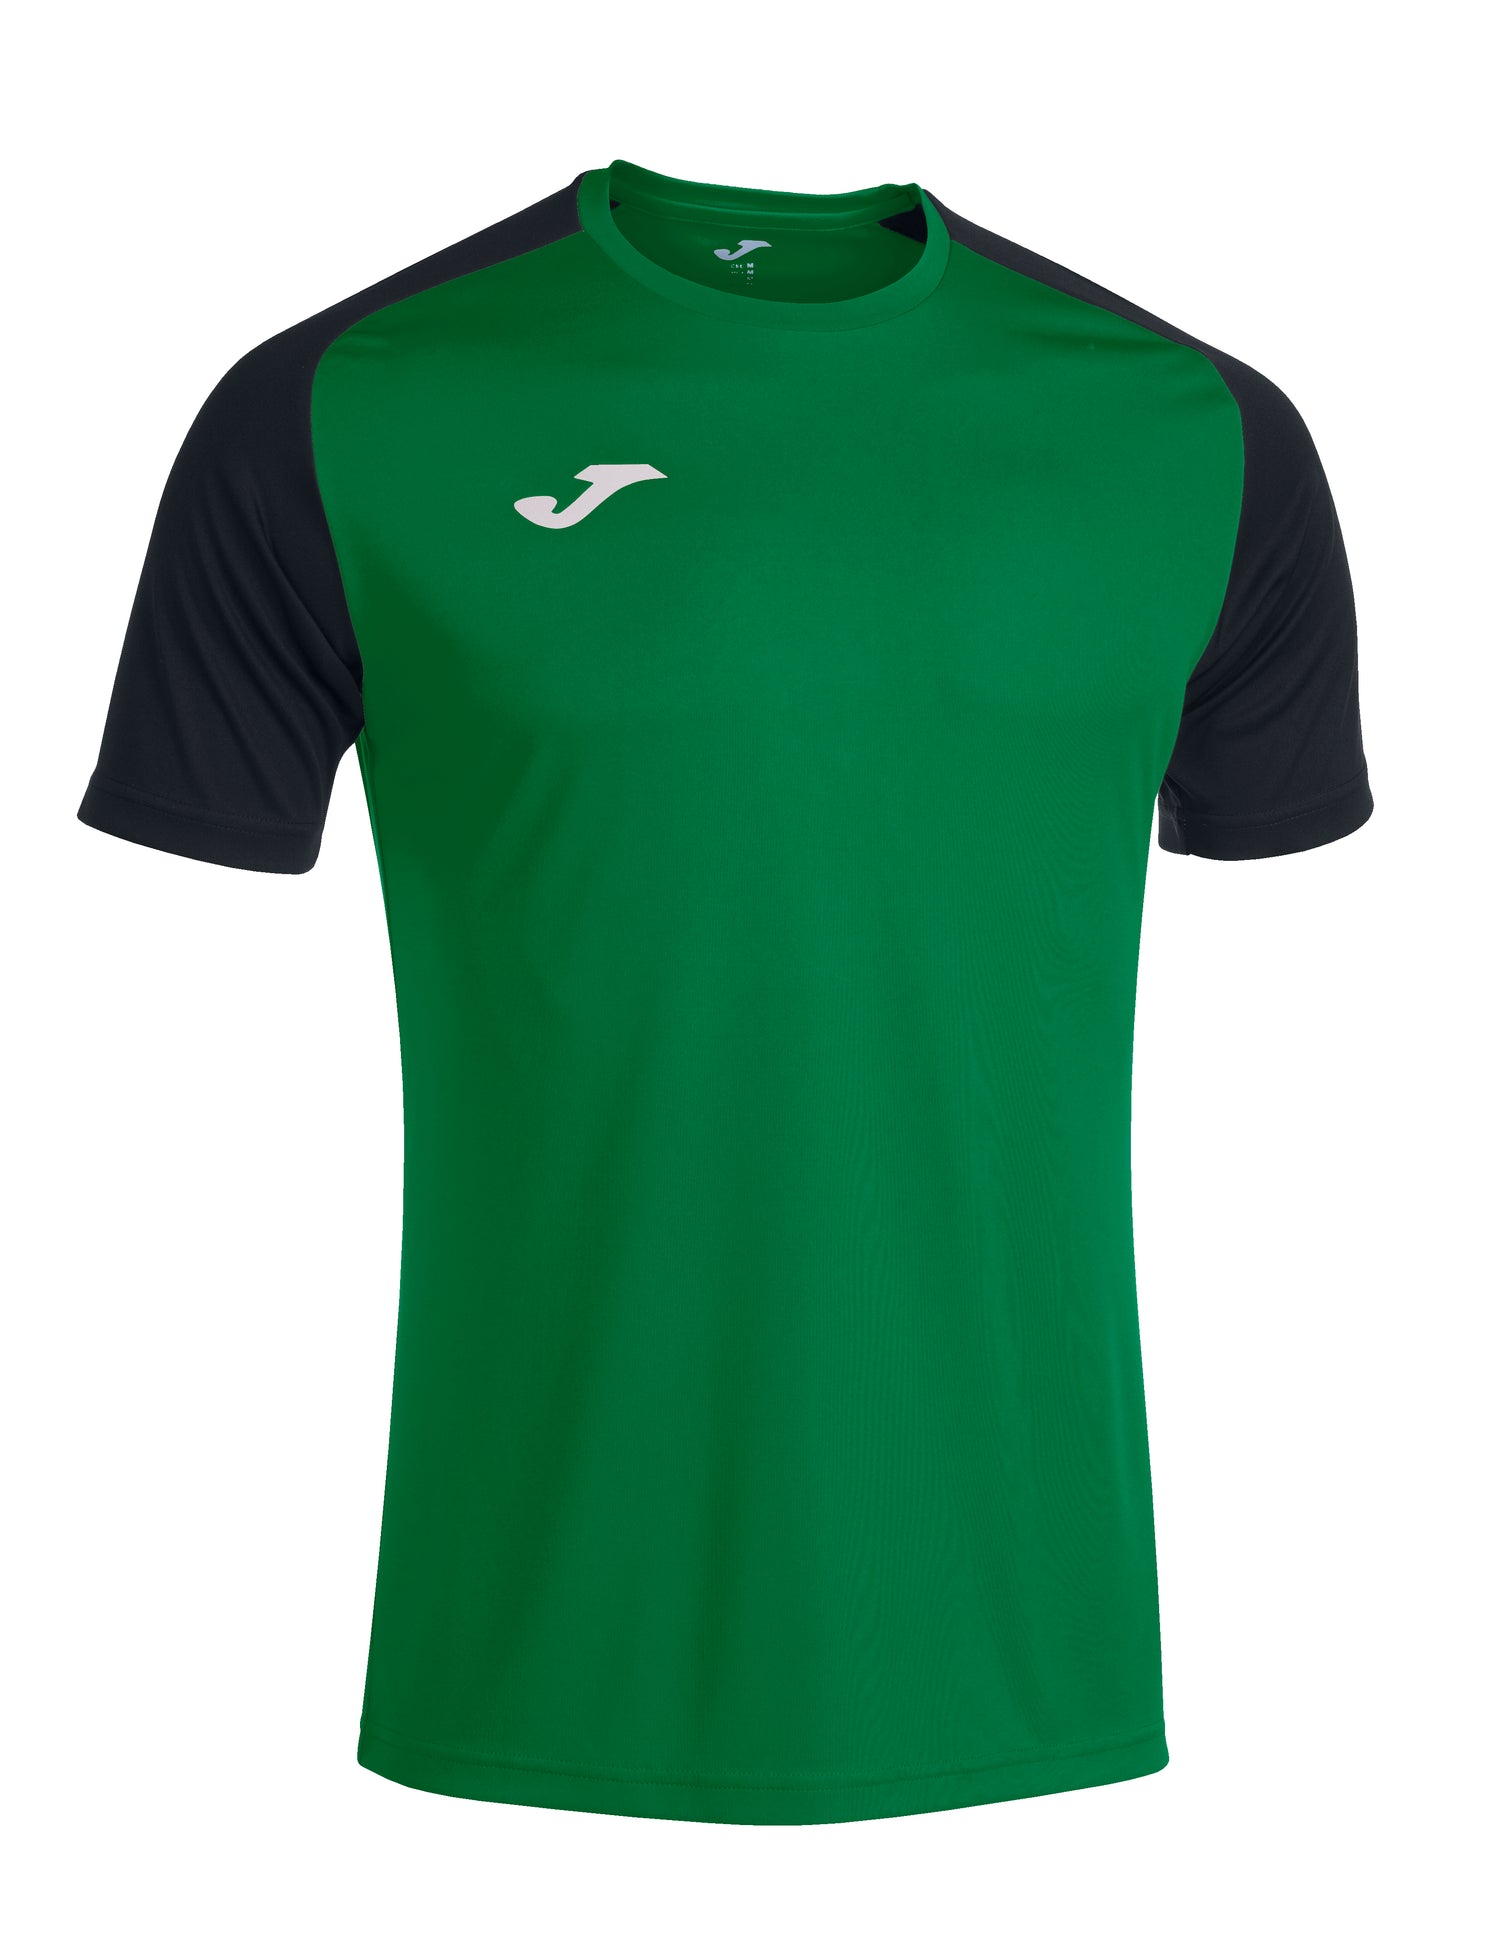 Joma Soccer Jersey available in Joma Canada Store. Customize your teamwear with sponsors and numbers. Joma is shipping in Canada